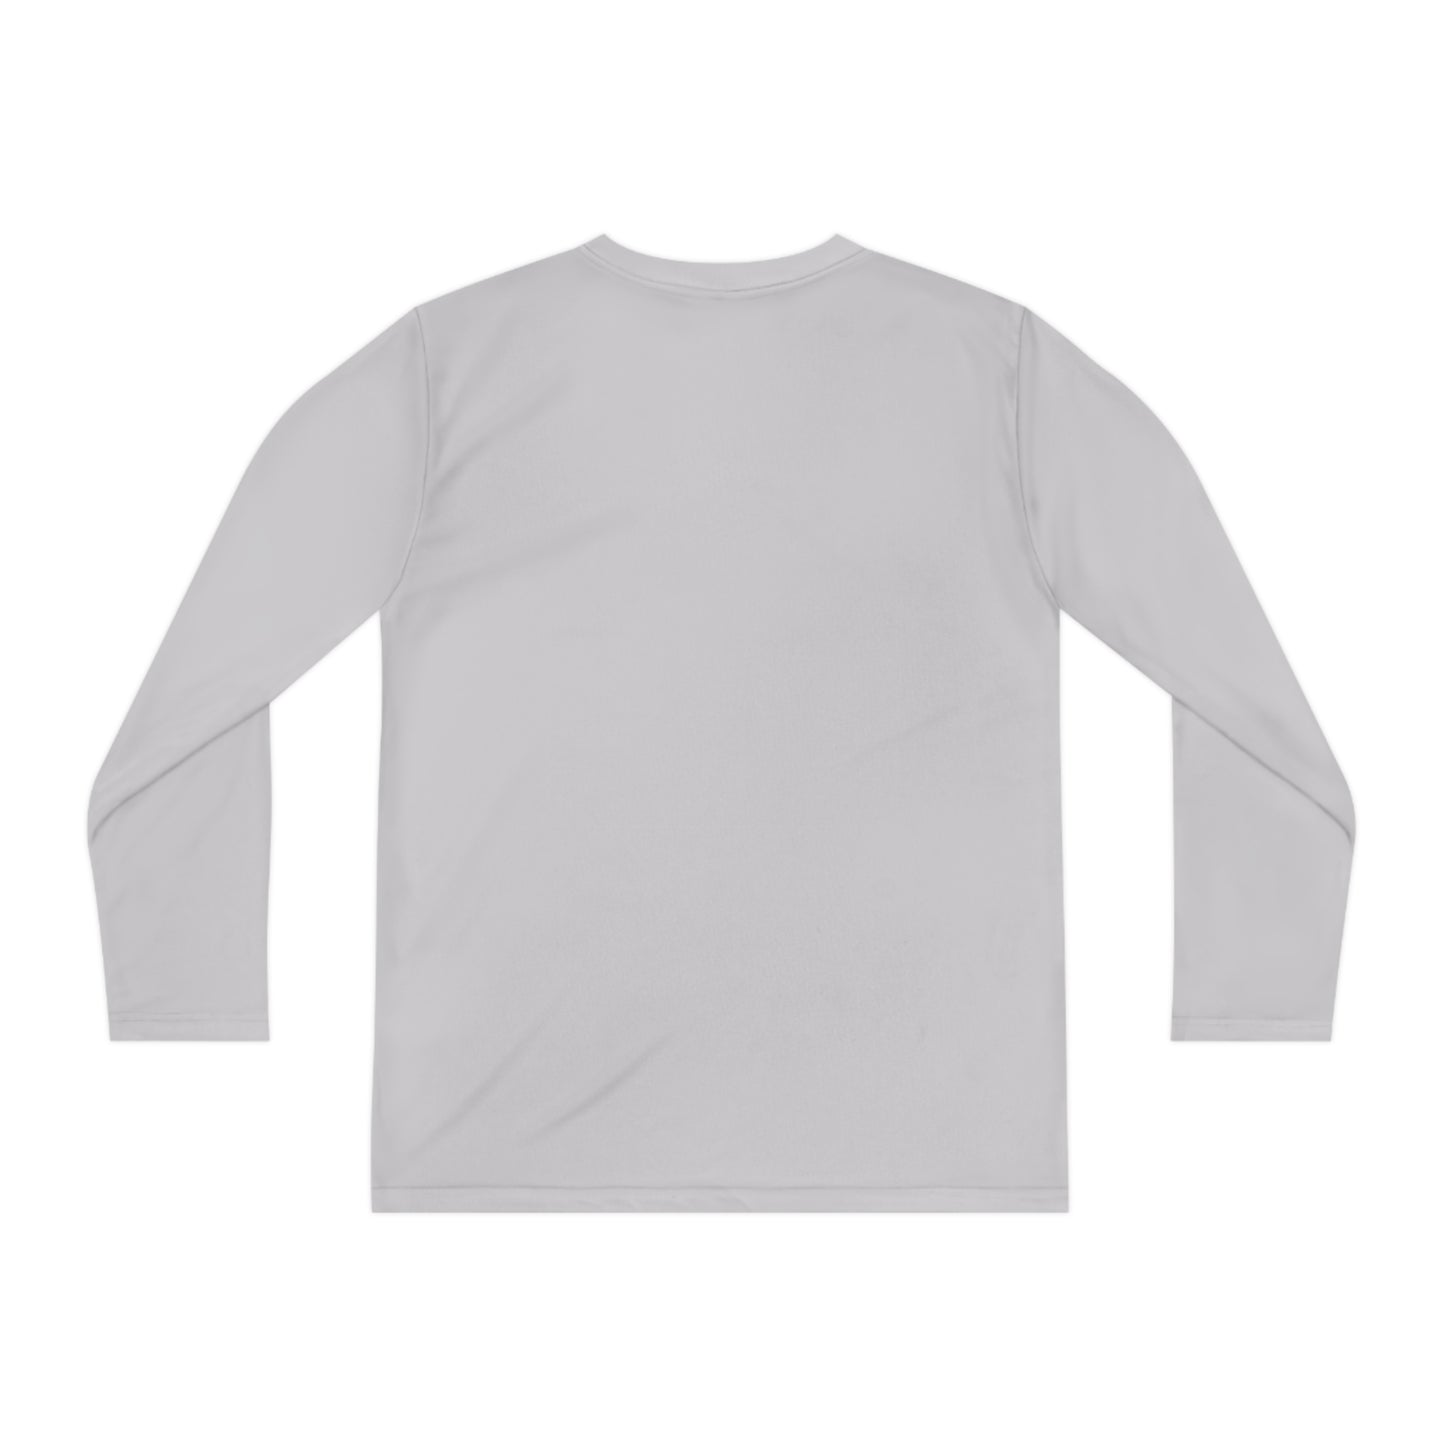 Family - Youth Long Sleeve Competitor T-Shirt